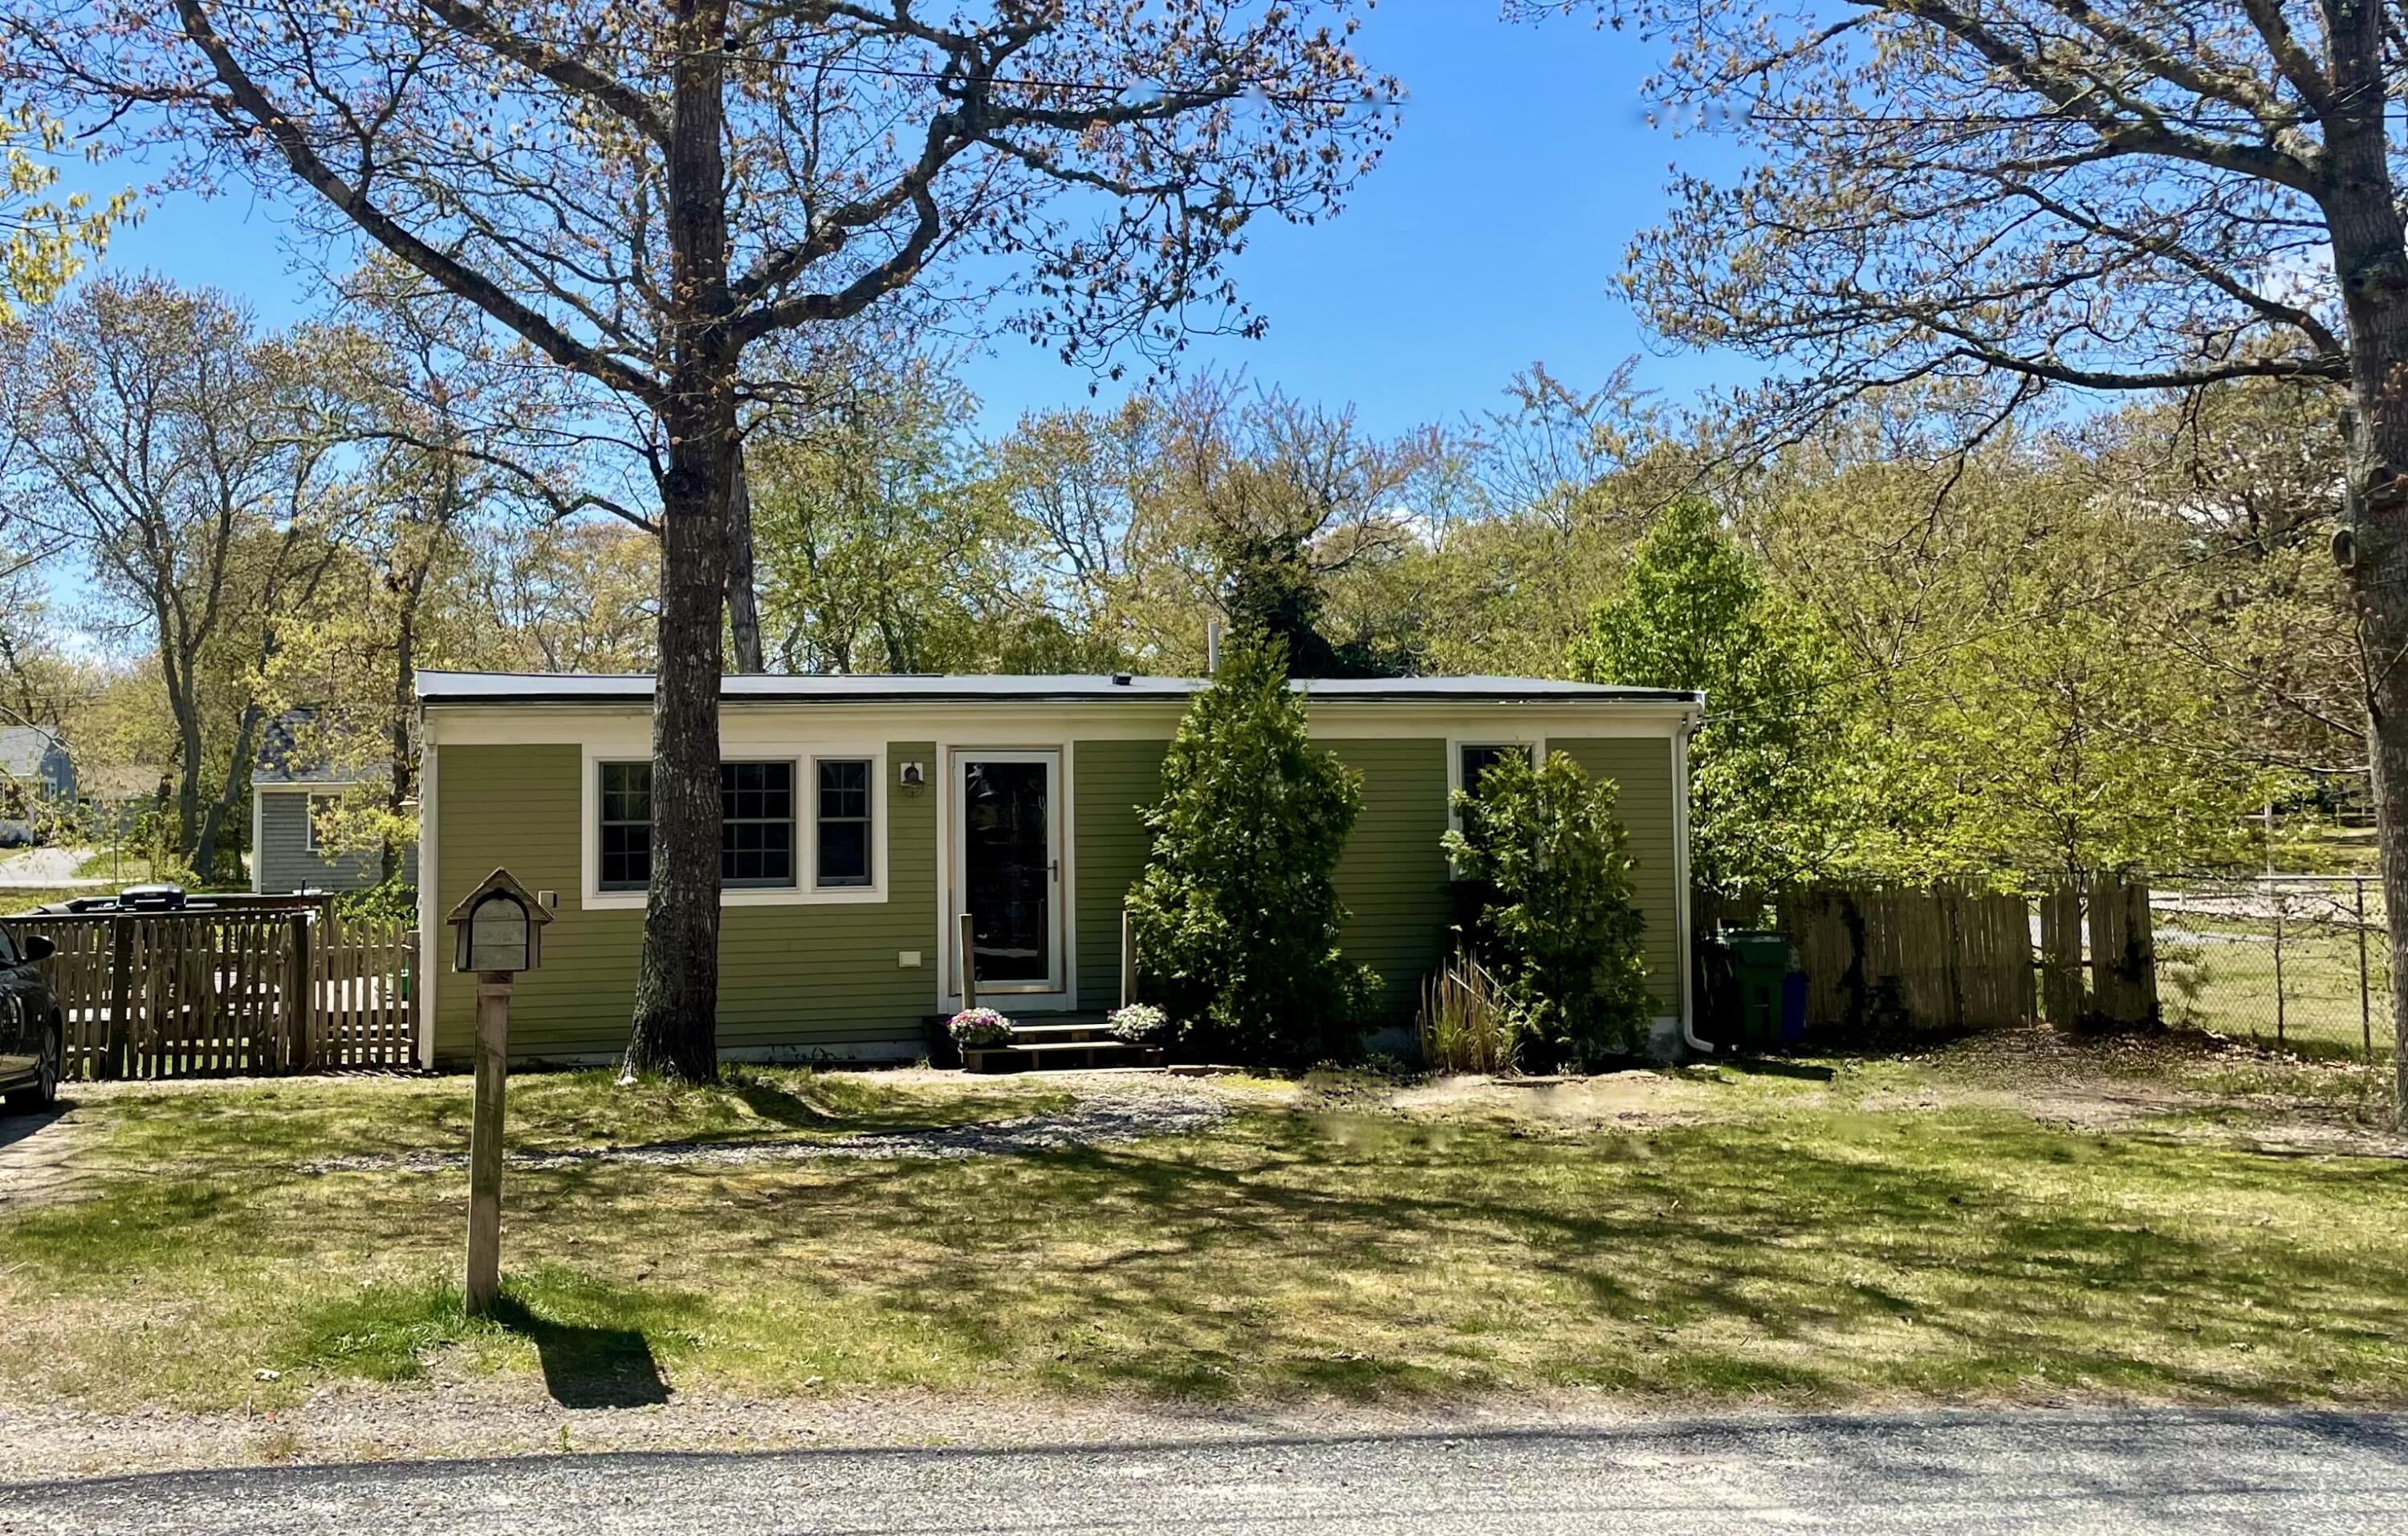 21 Butler Avenue, West Yarmouth, Massachusetts 02673, 2 Bedrooms Bedrooms, 4 Rooms Rooms,1 BathroomBathrooms,Residential,For Sale,21 Butler Avenue,22402197